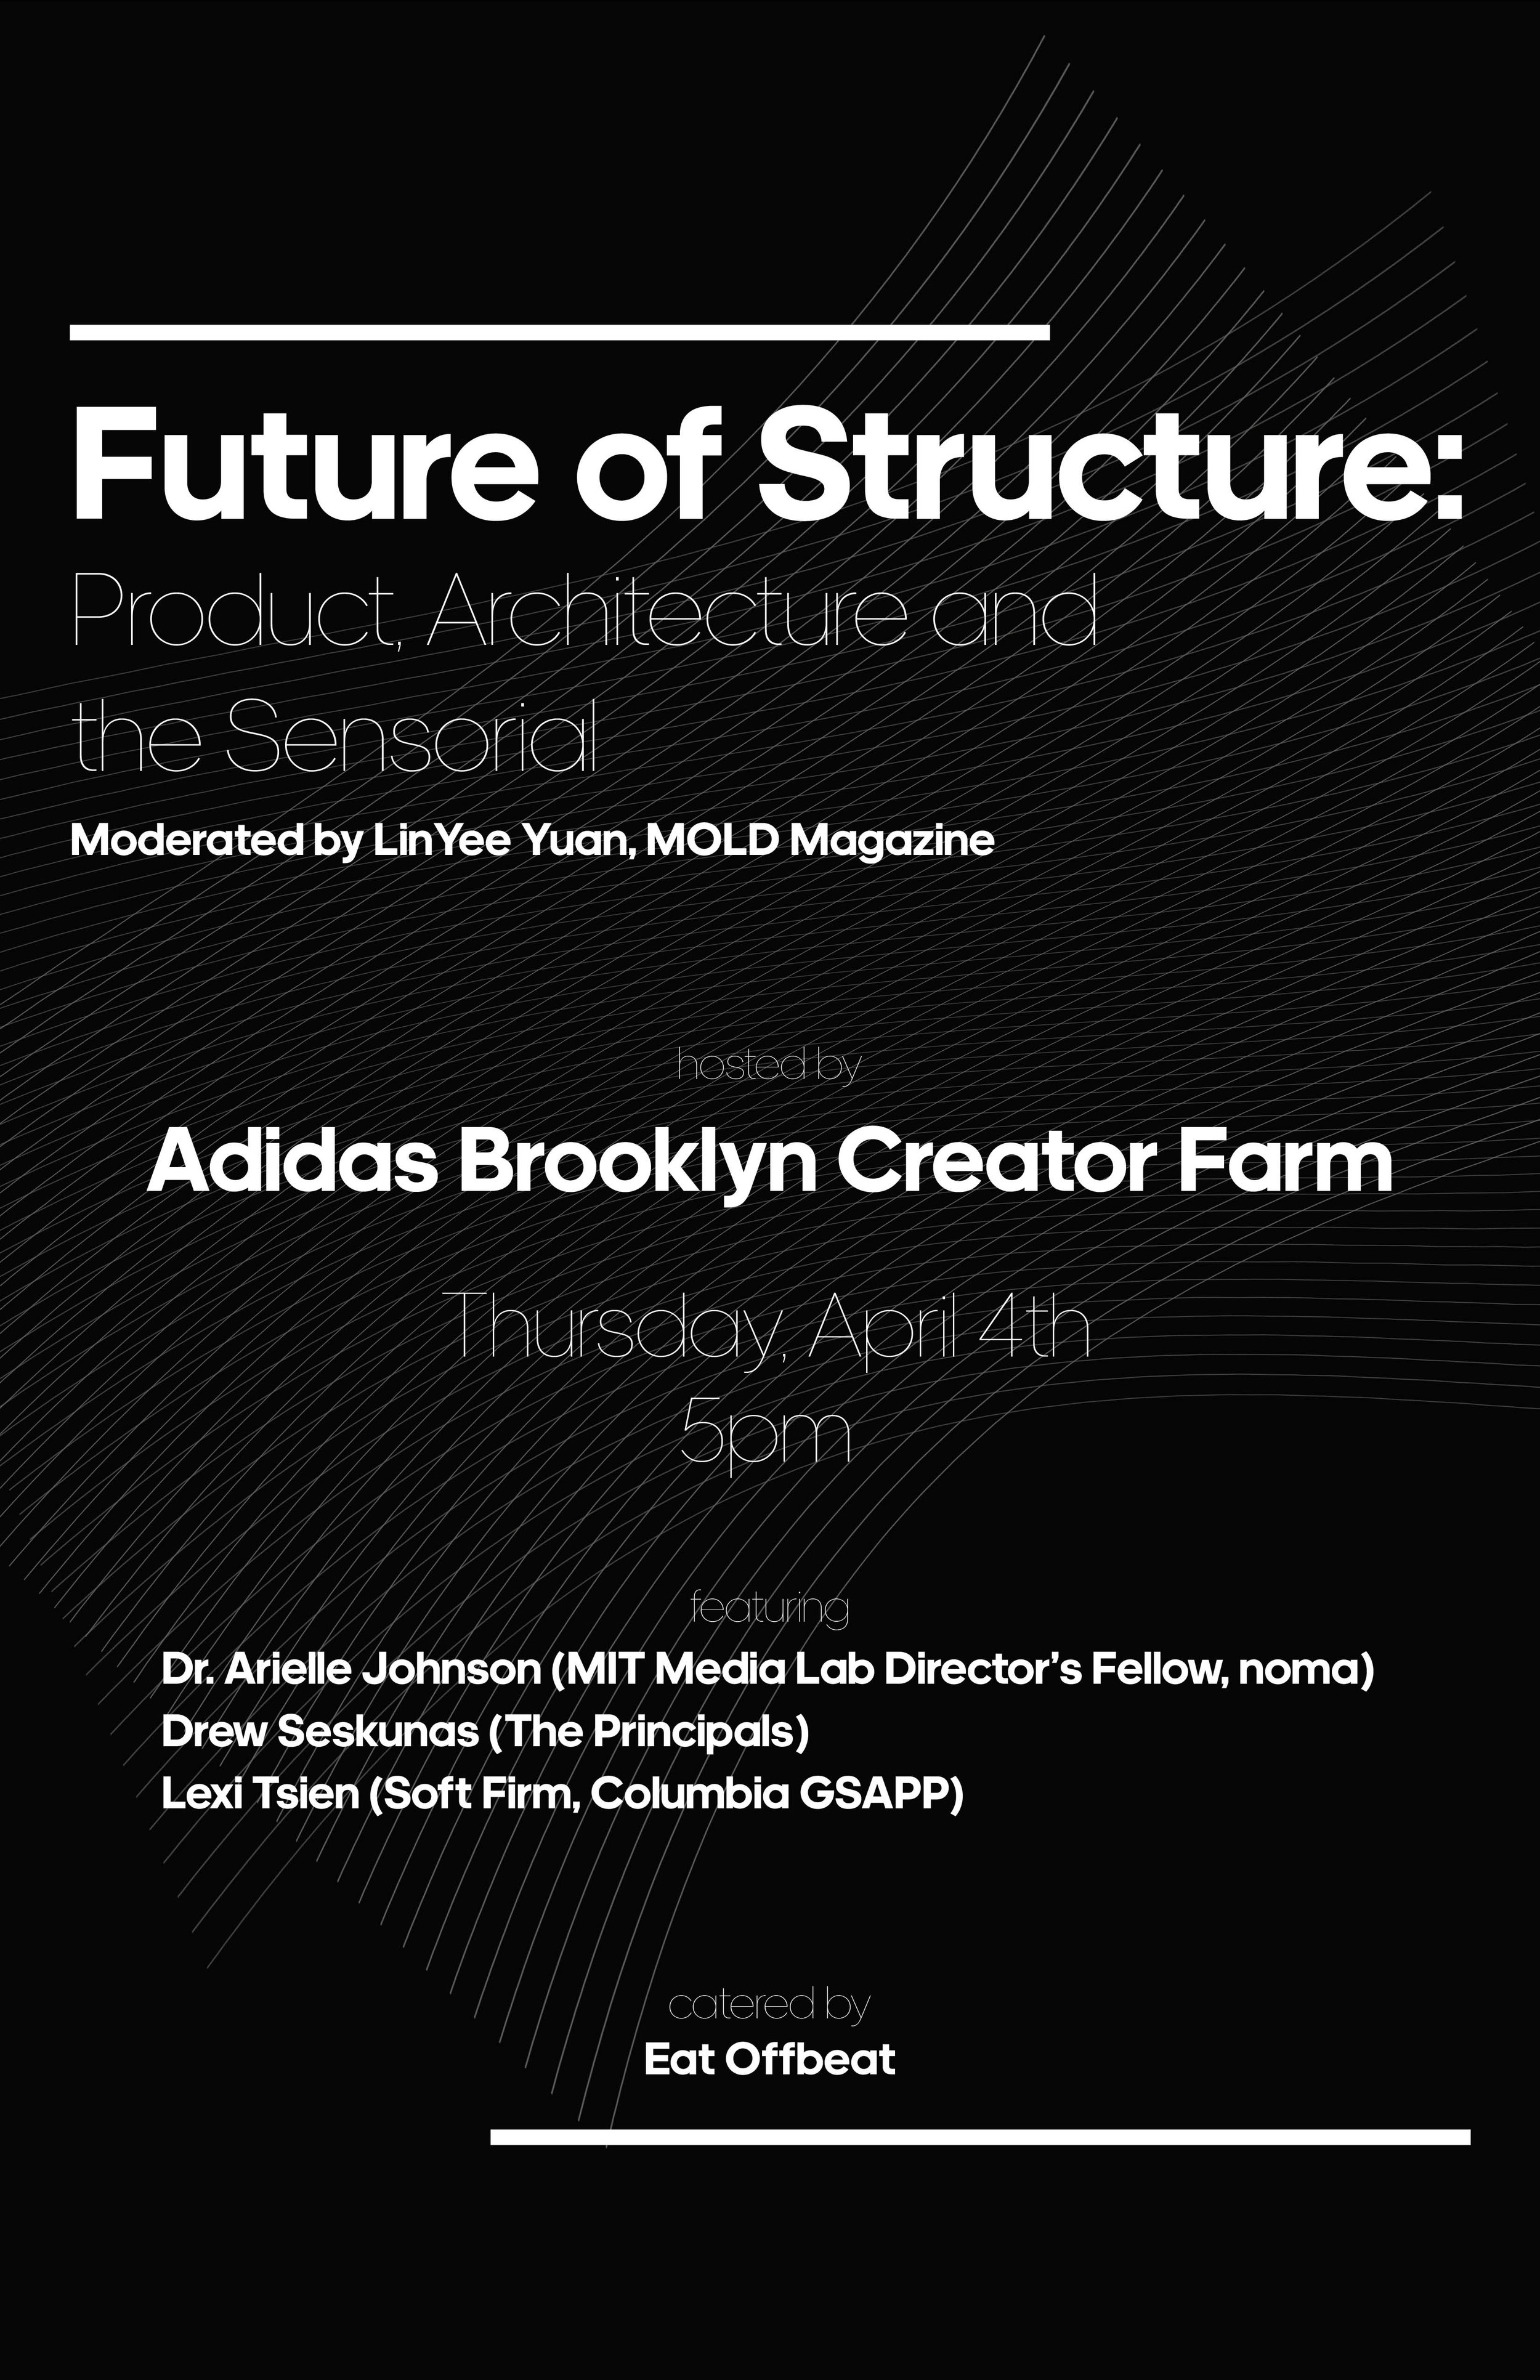 Future of Structure: Product, the Sensorial at Adidas Brooklyn creator Farm — Dr. Johnson Likes Flavor